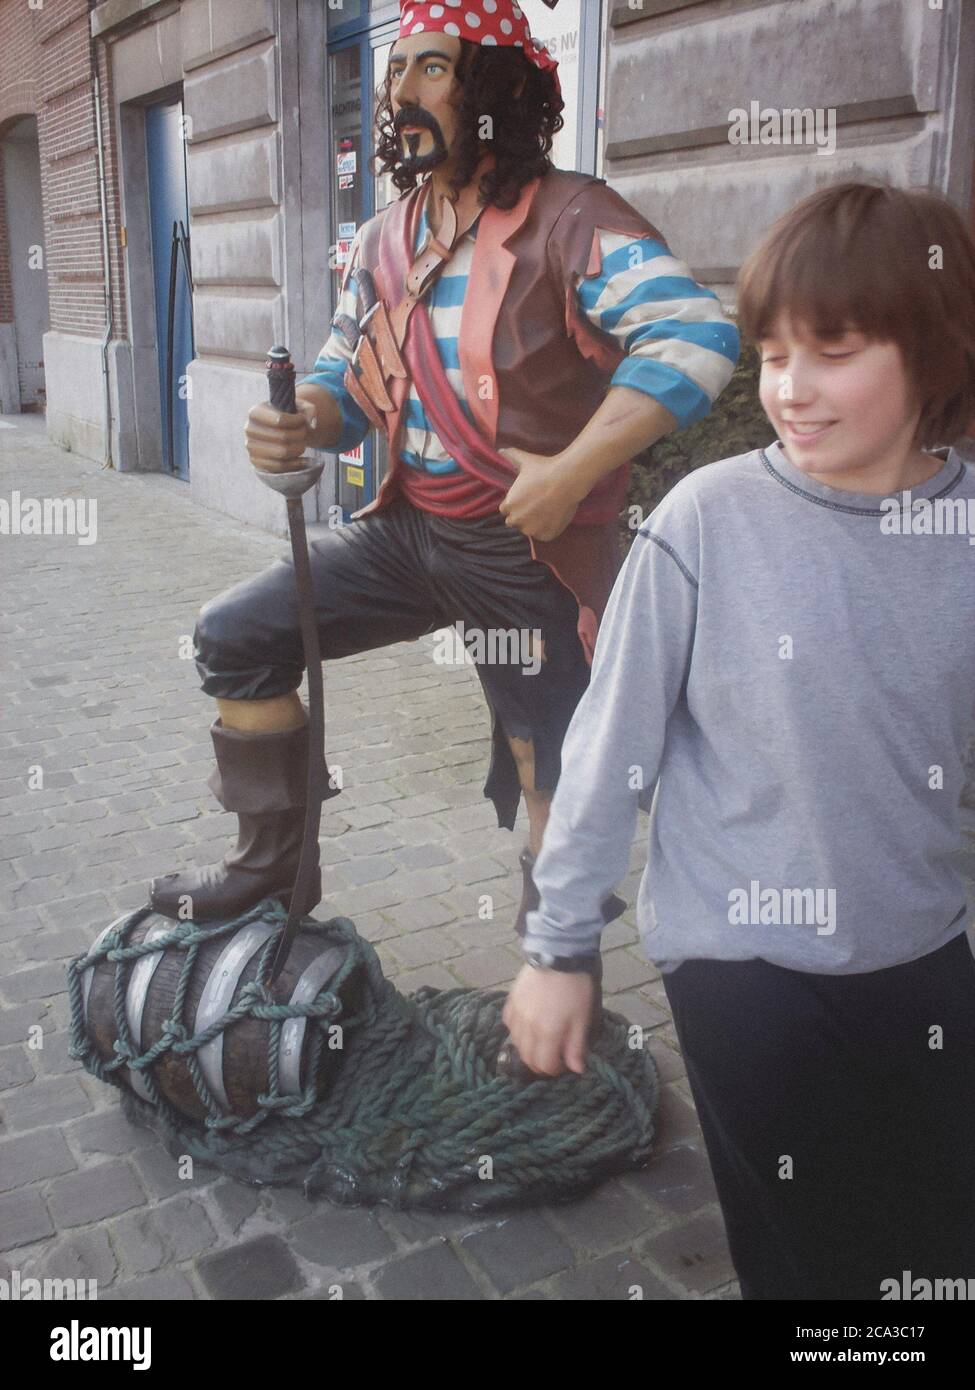 Casually dressed young boy chuckles as he looks back at a flamboyant, brightly coloured model of a buccaneer in Antwerp, Belgium. Stock Photo